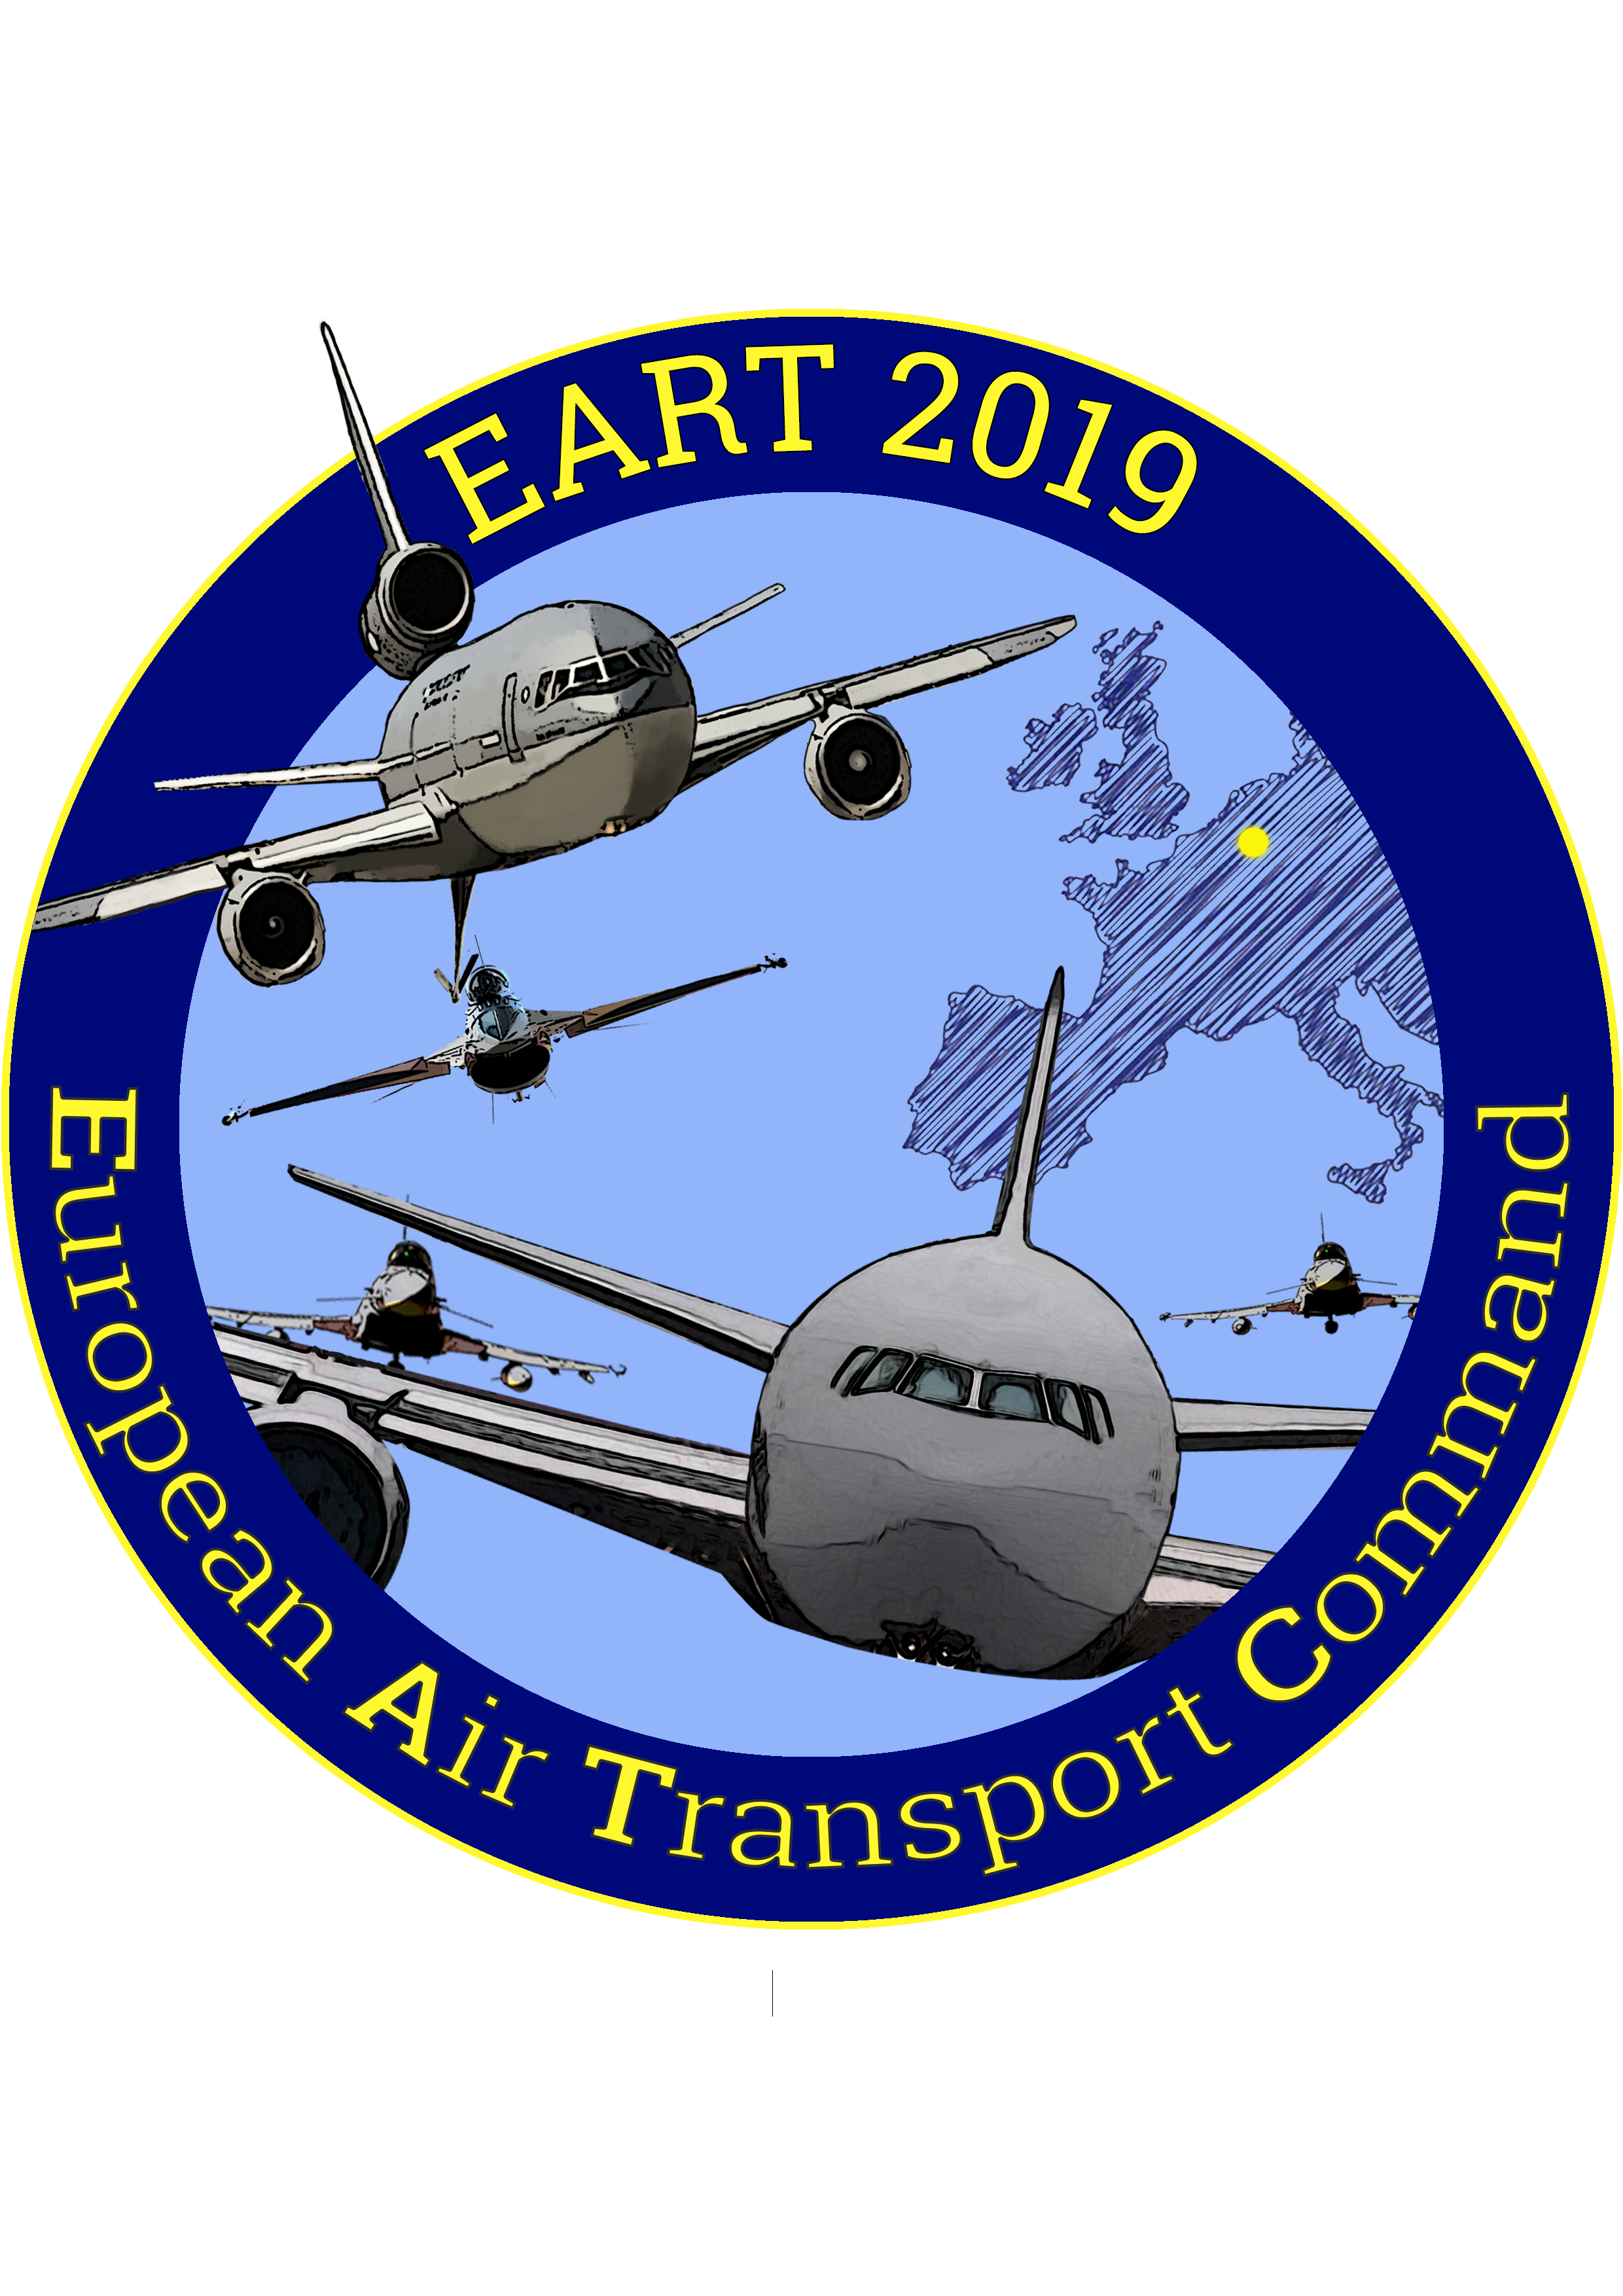 Watch our awesome EART 2019 video